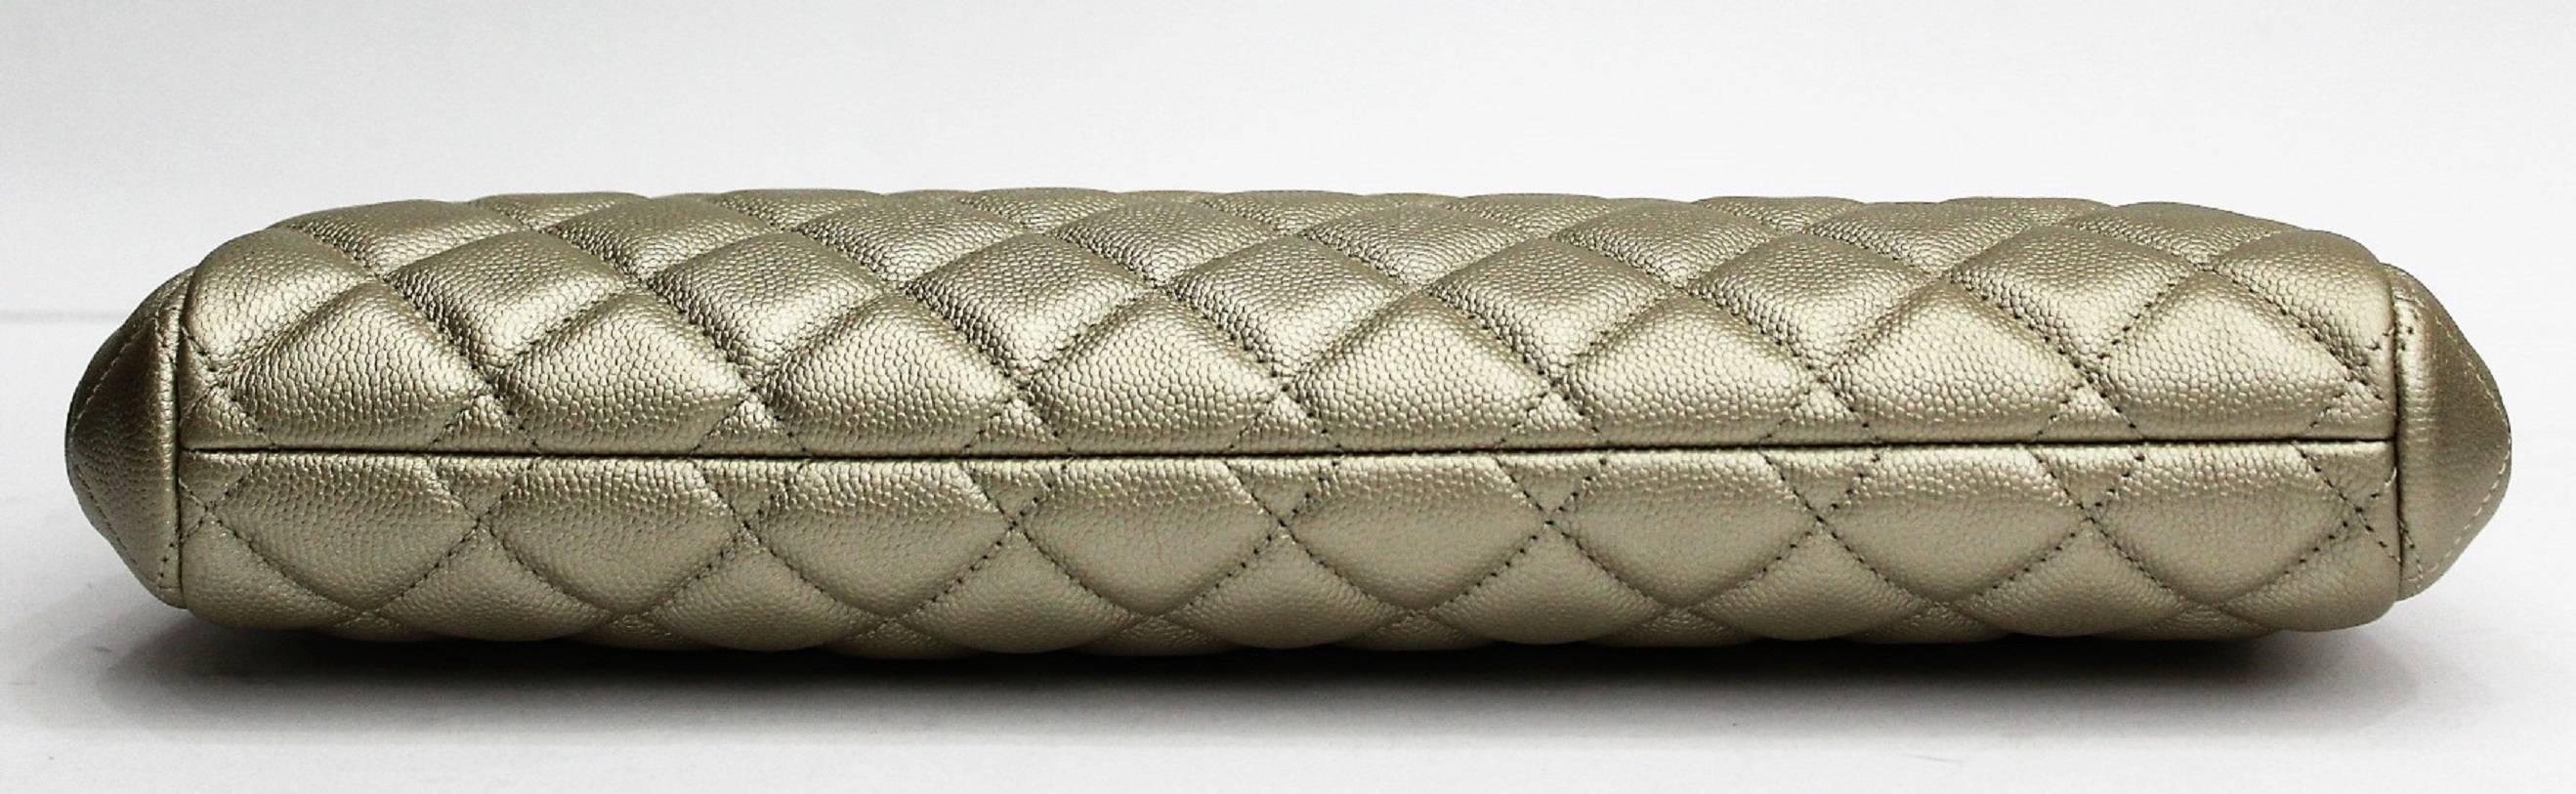 Brown Chanel Clutch Gold Grained Leather  collection 2016/2017